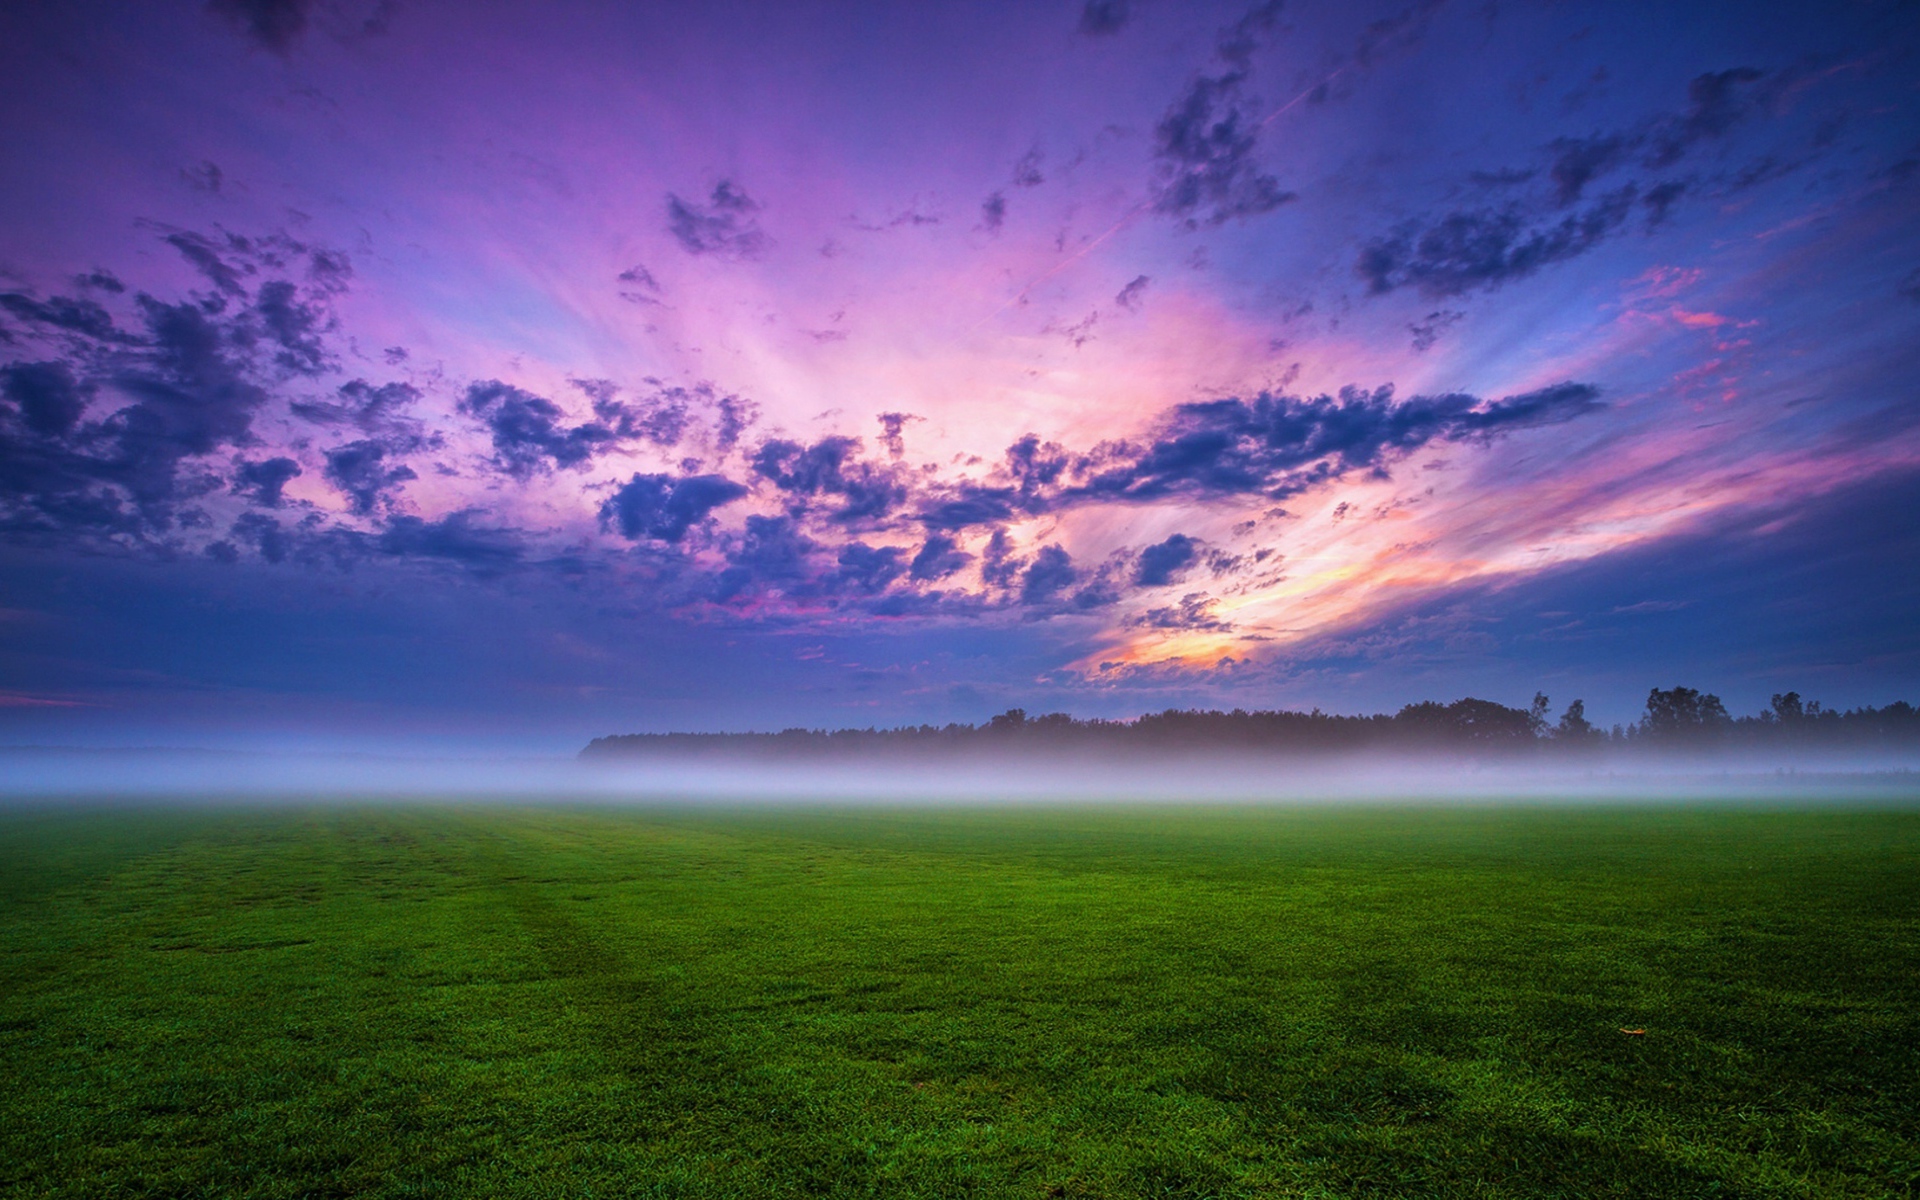 Morning mist over the field under the beautiful sky